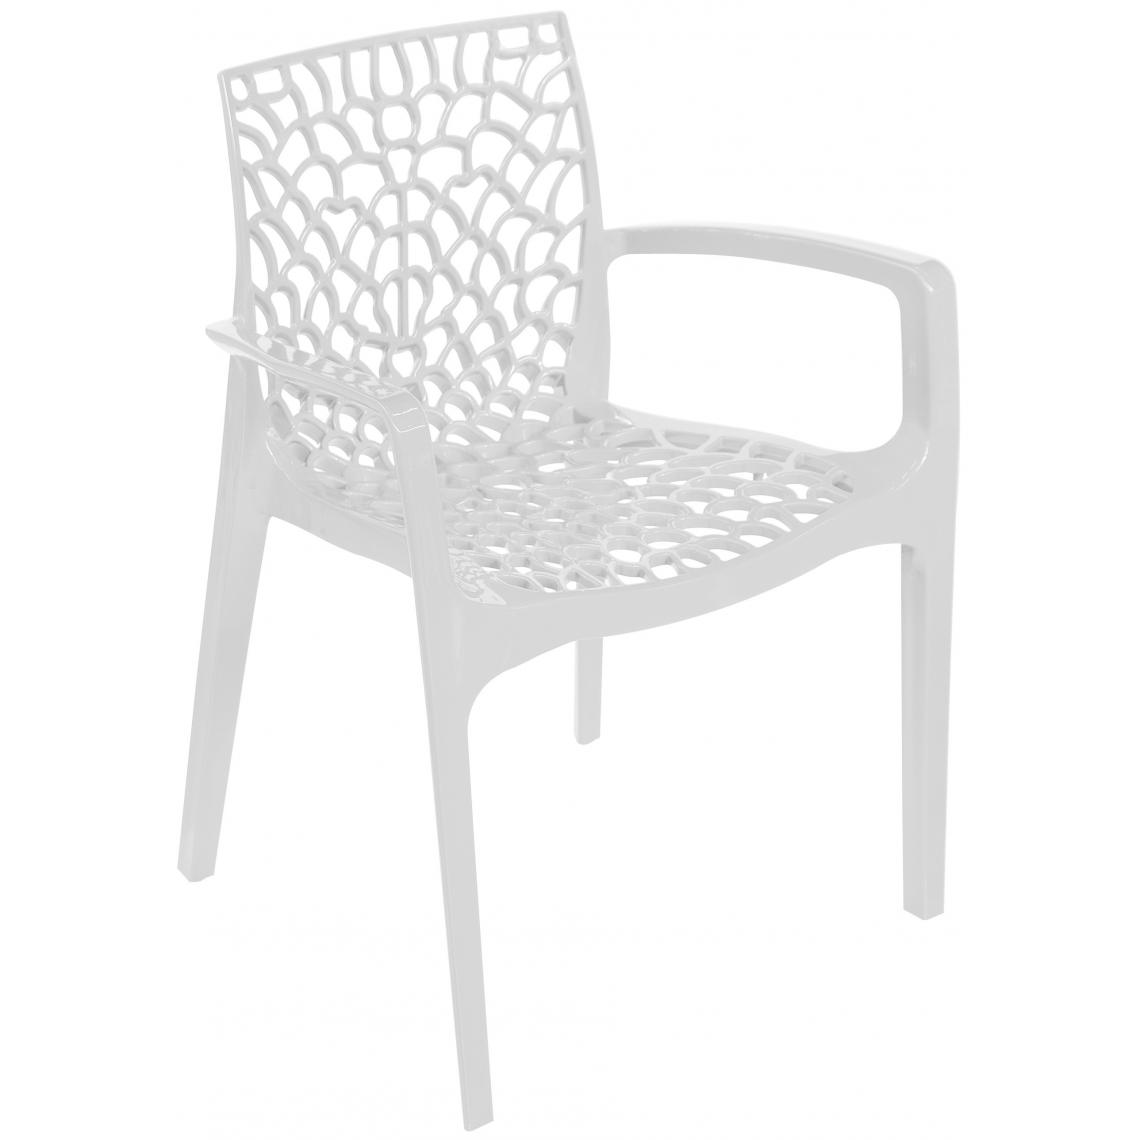 3S. x Home - Chaise Design Blanche Avec Accoudoirs GRUYER - Chaises